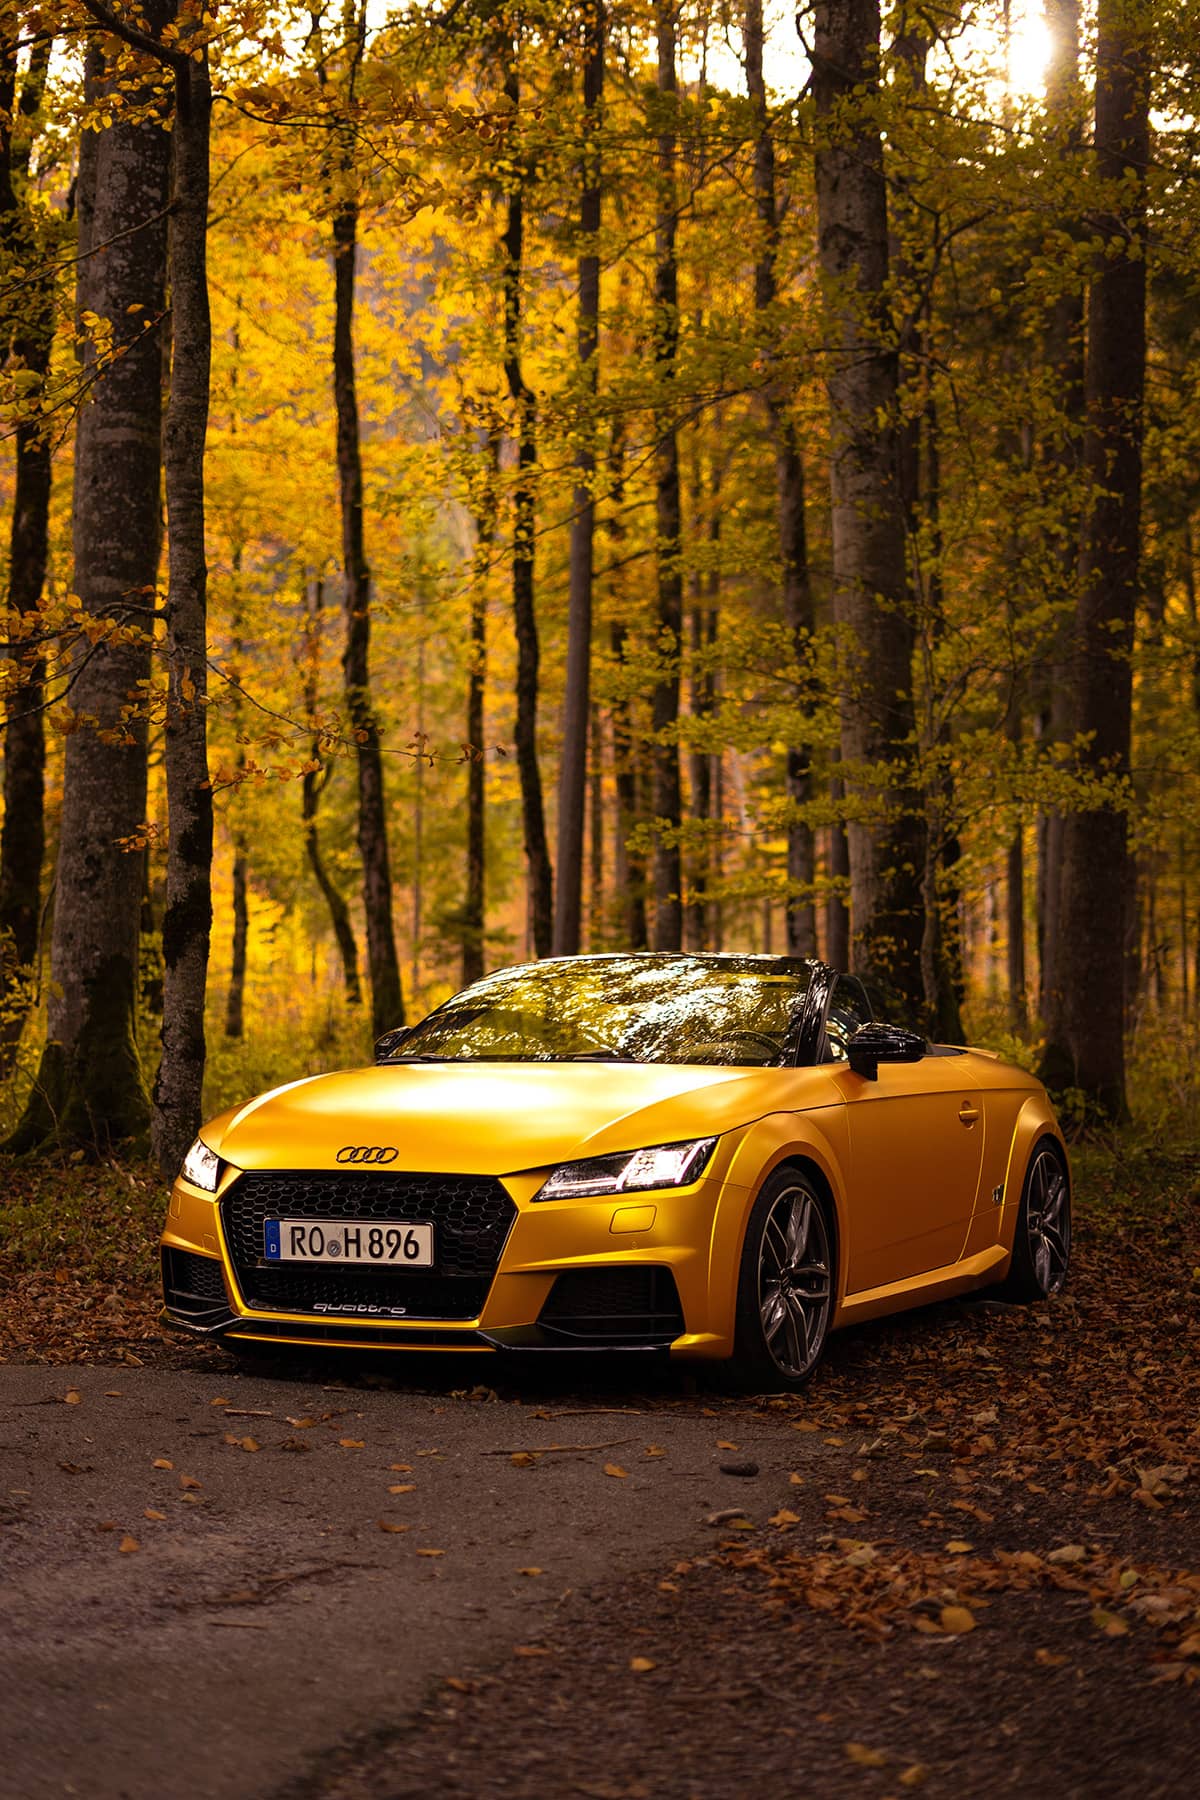 Lowered Audi TT convertible with lowered suspension and stock wheels